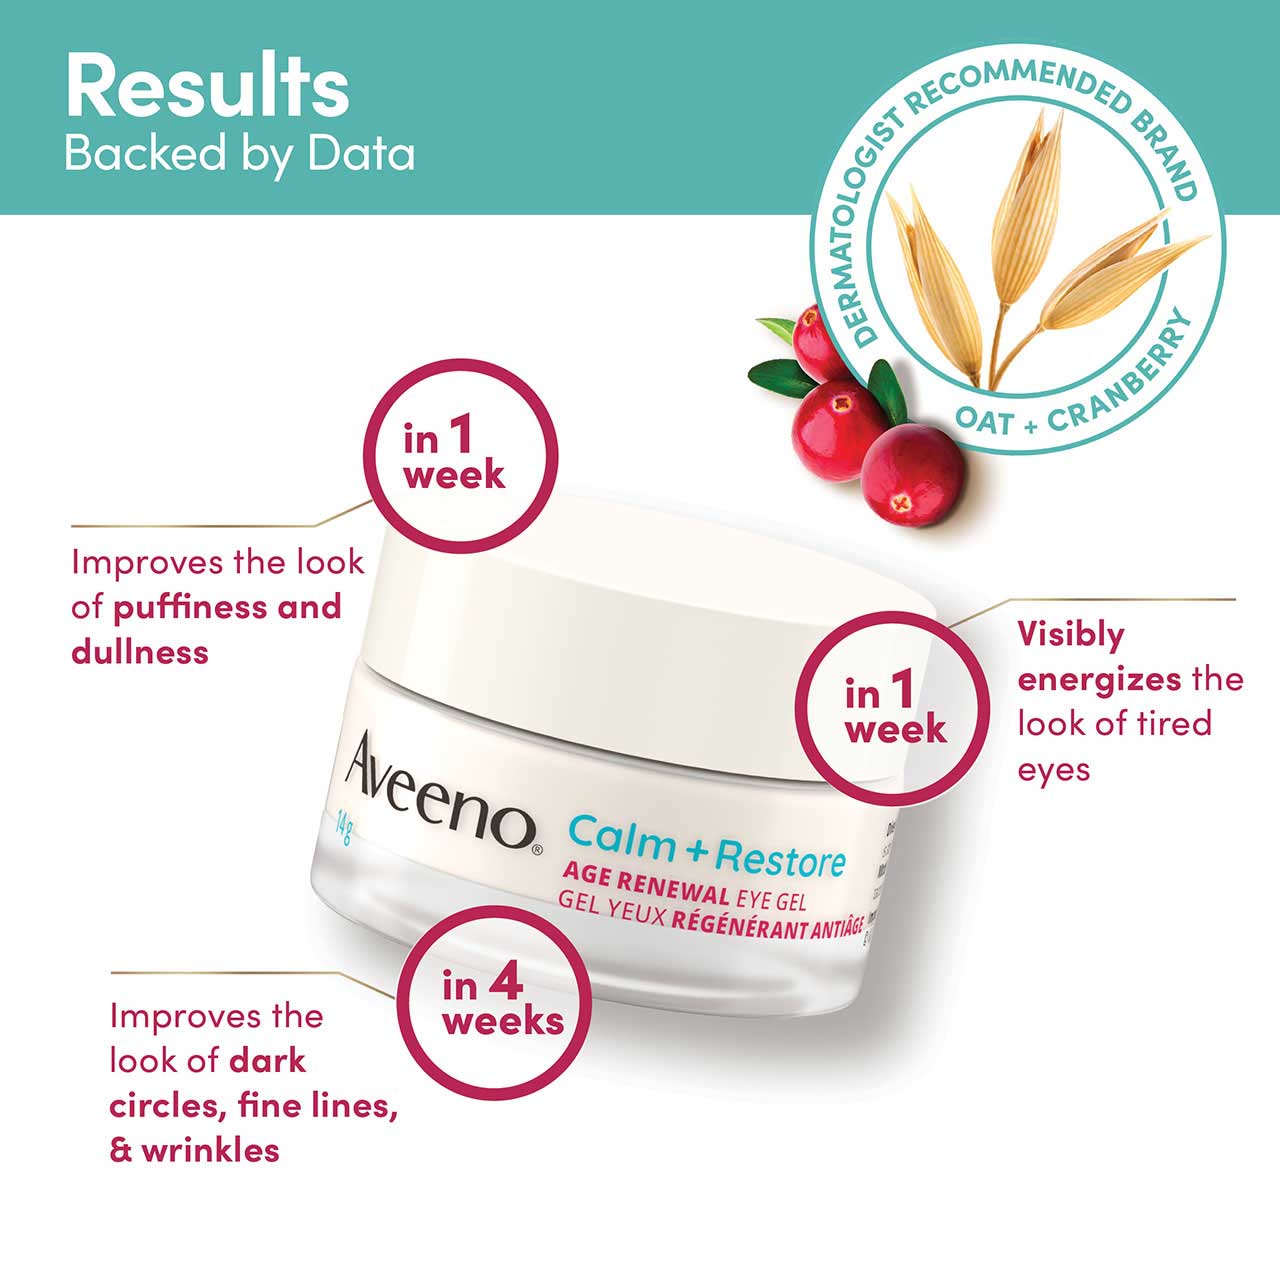 AVEENO® Calm + Restore Age Renewal Eye Gel, glass jar 14 g with product claims for week 1 and 4 results backed by data